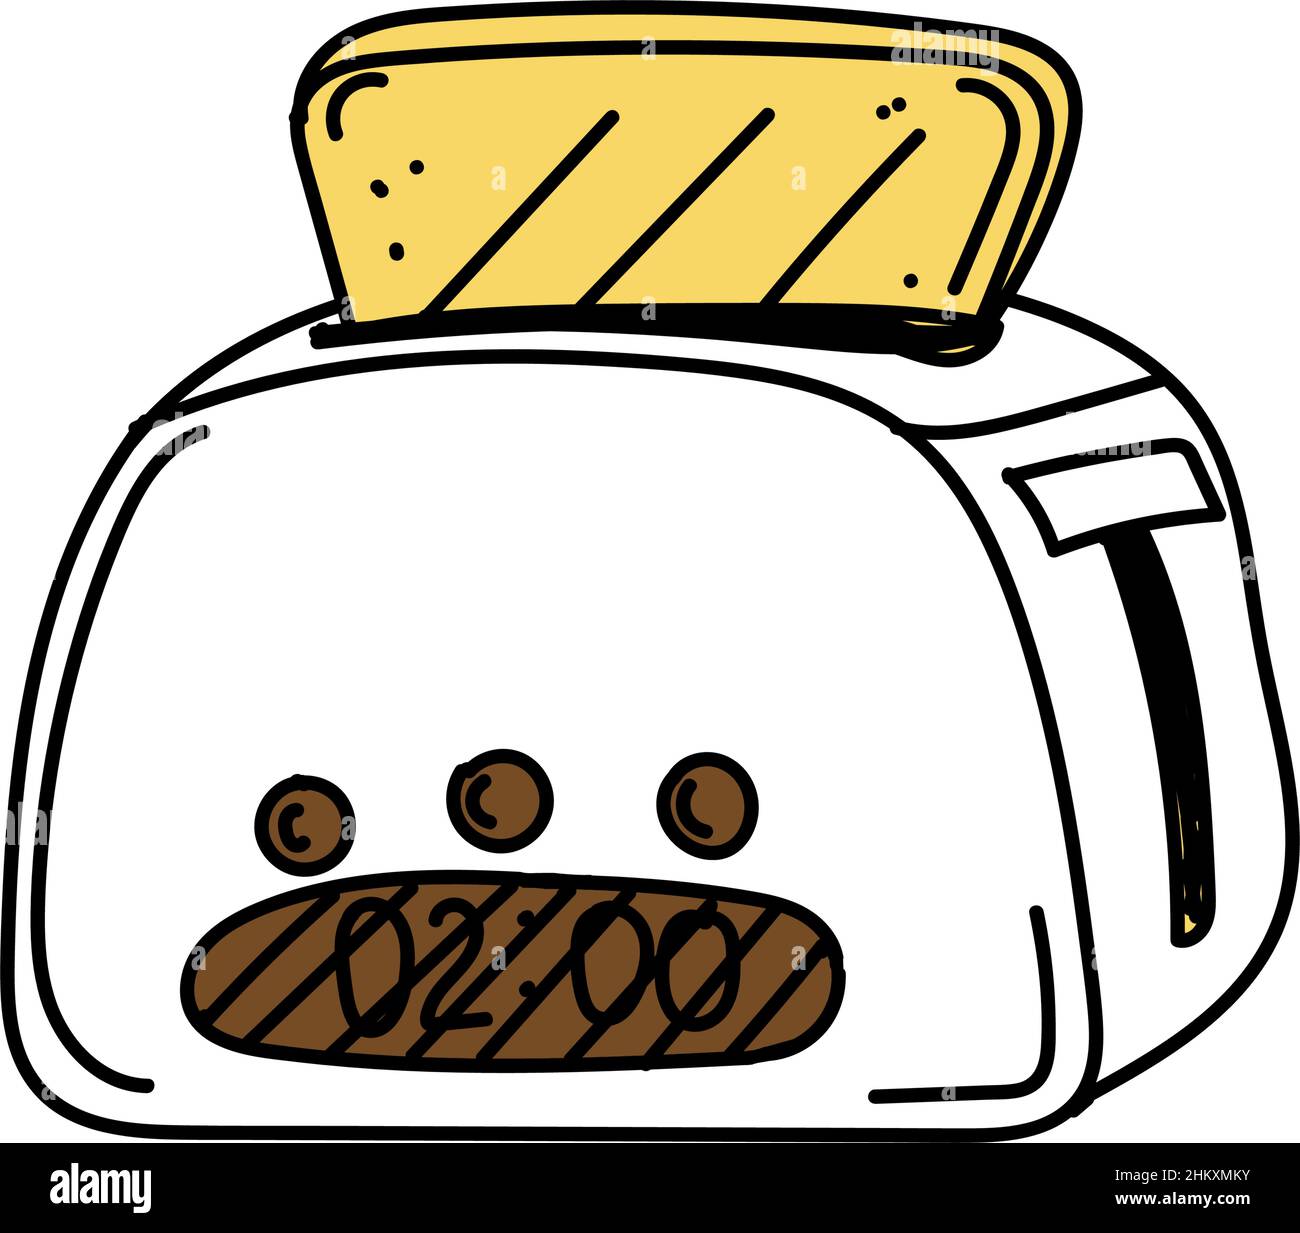 Toaster, hand-drawn doodle-style elements. Breakfast. Good Morning. Healthy Eating. Hot bread. Toast. A simple doodle style vector. Stock Vector